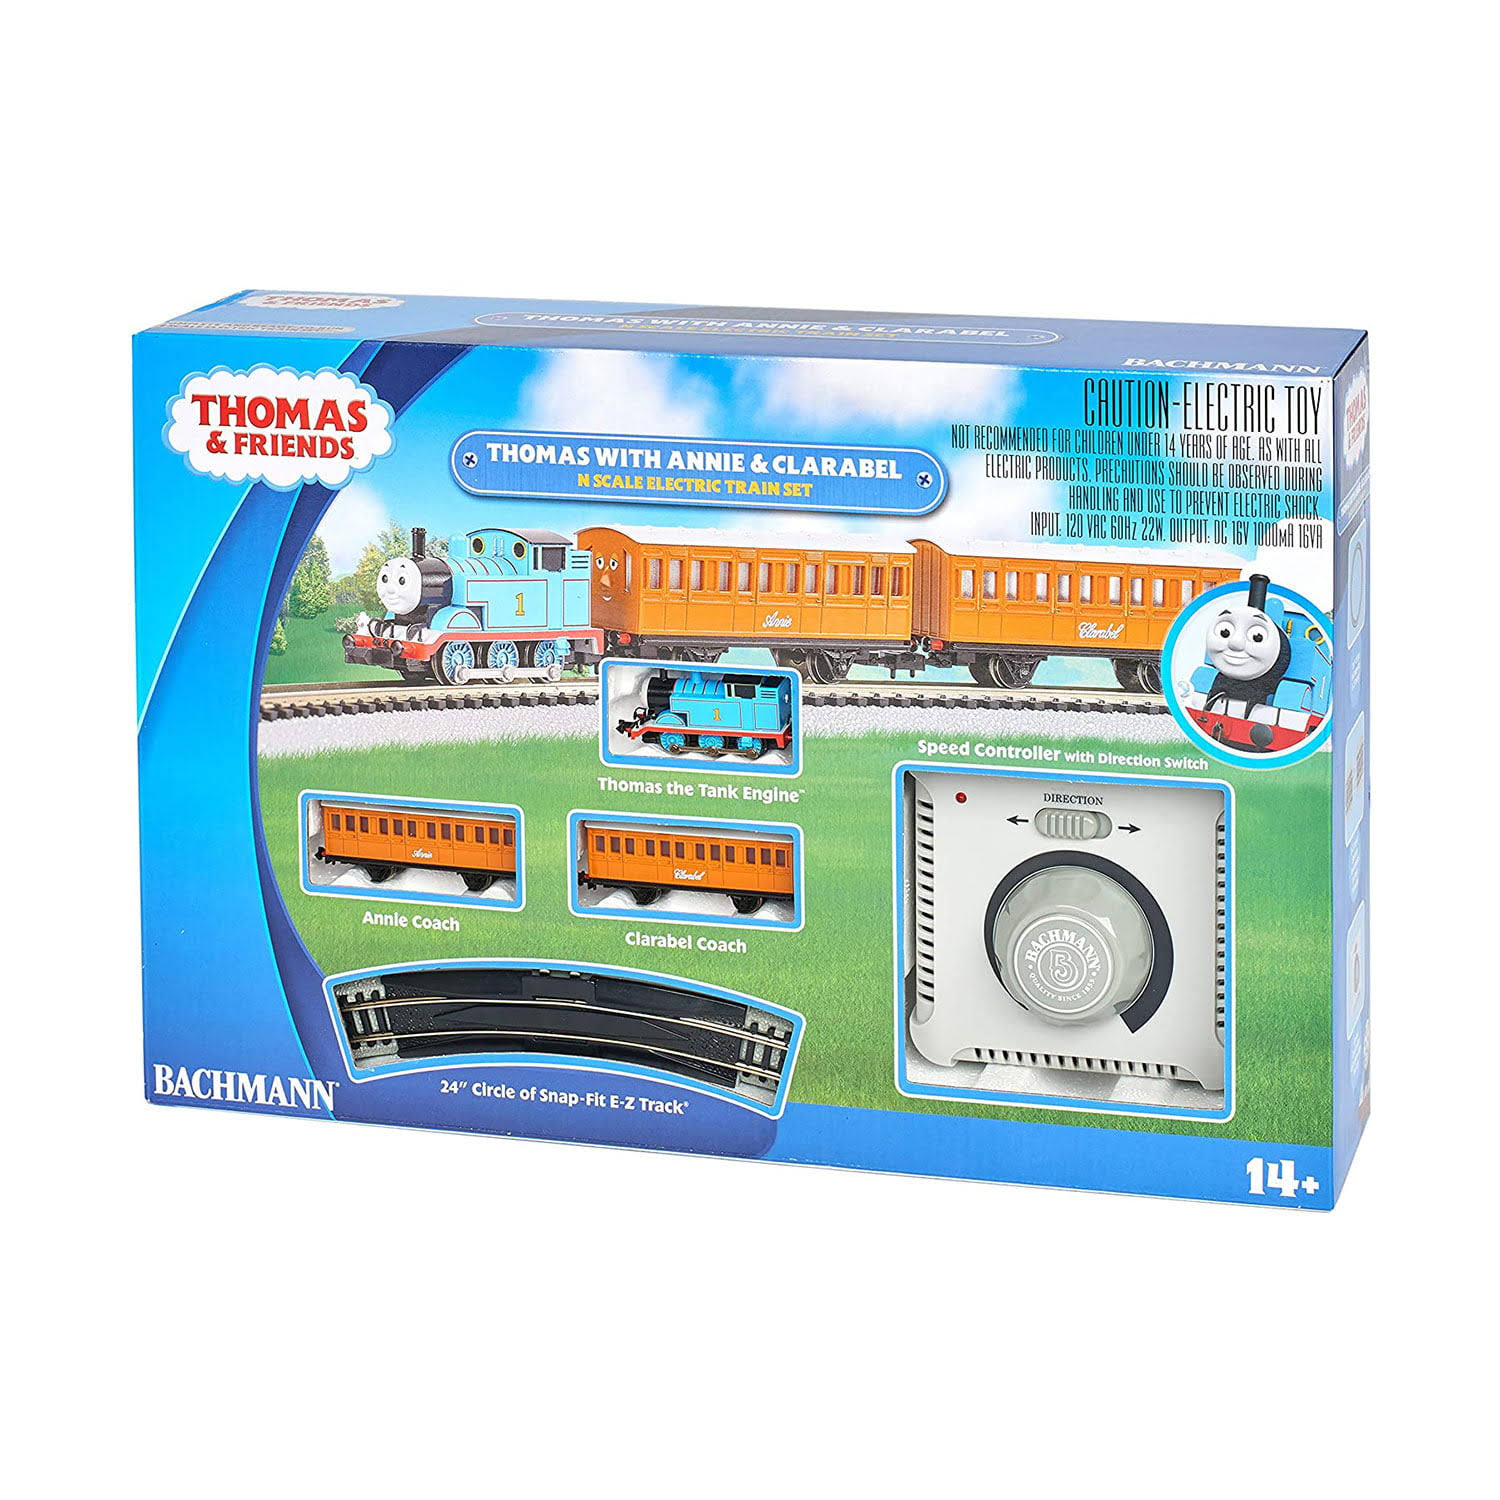 Bachmann Trains - Thomas With Annie And Clarabel Ready To Run Electric Train Set - N Scale , Blue